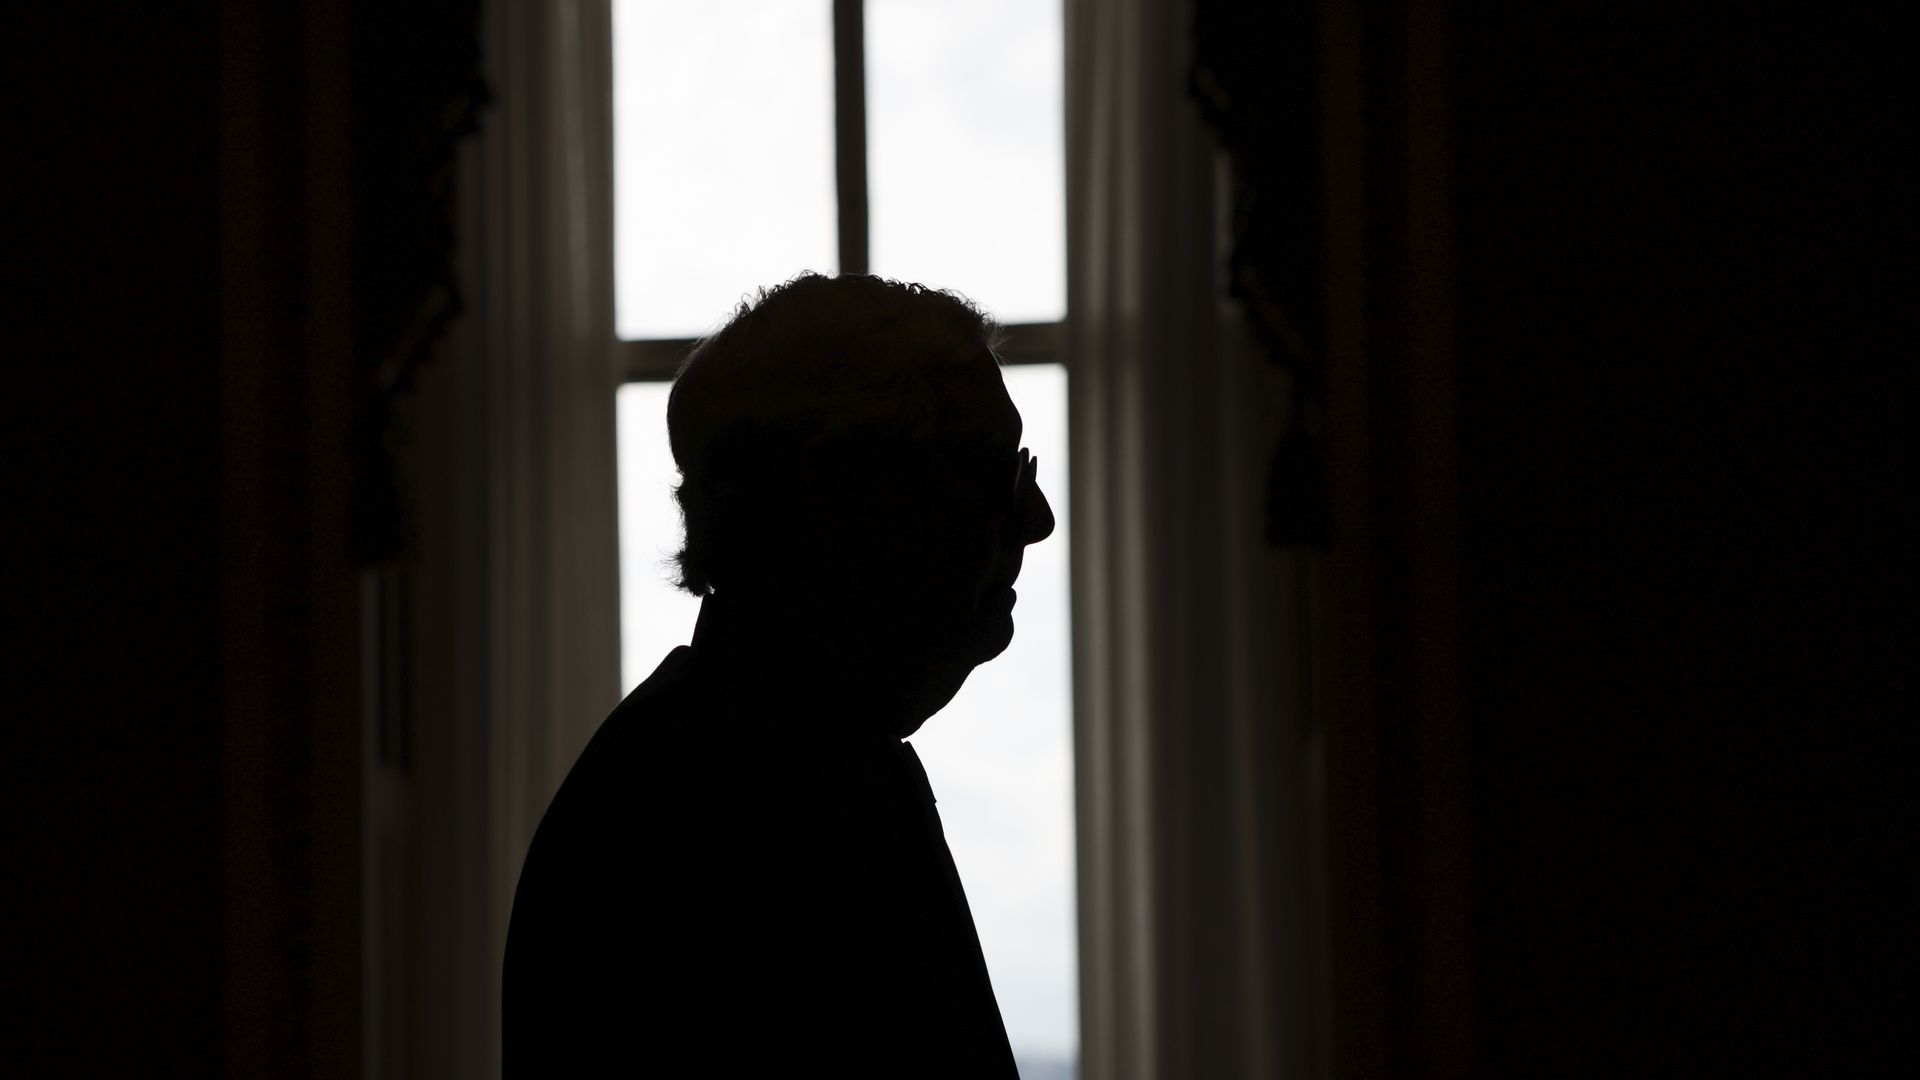 Senate Minority Leader Mitch McConnell is seen in silhouette as he walks through the Capitol.